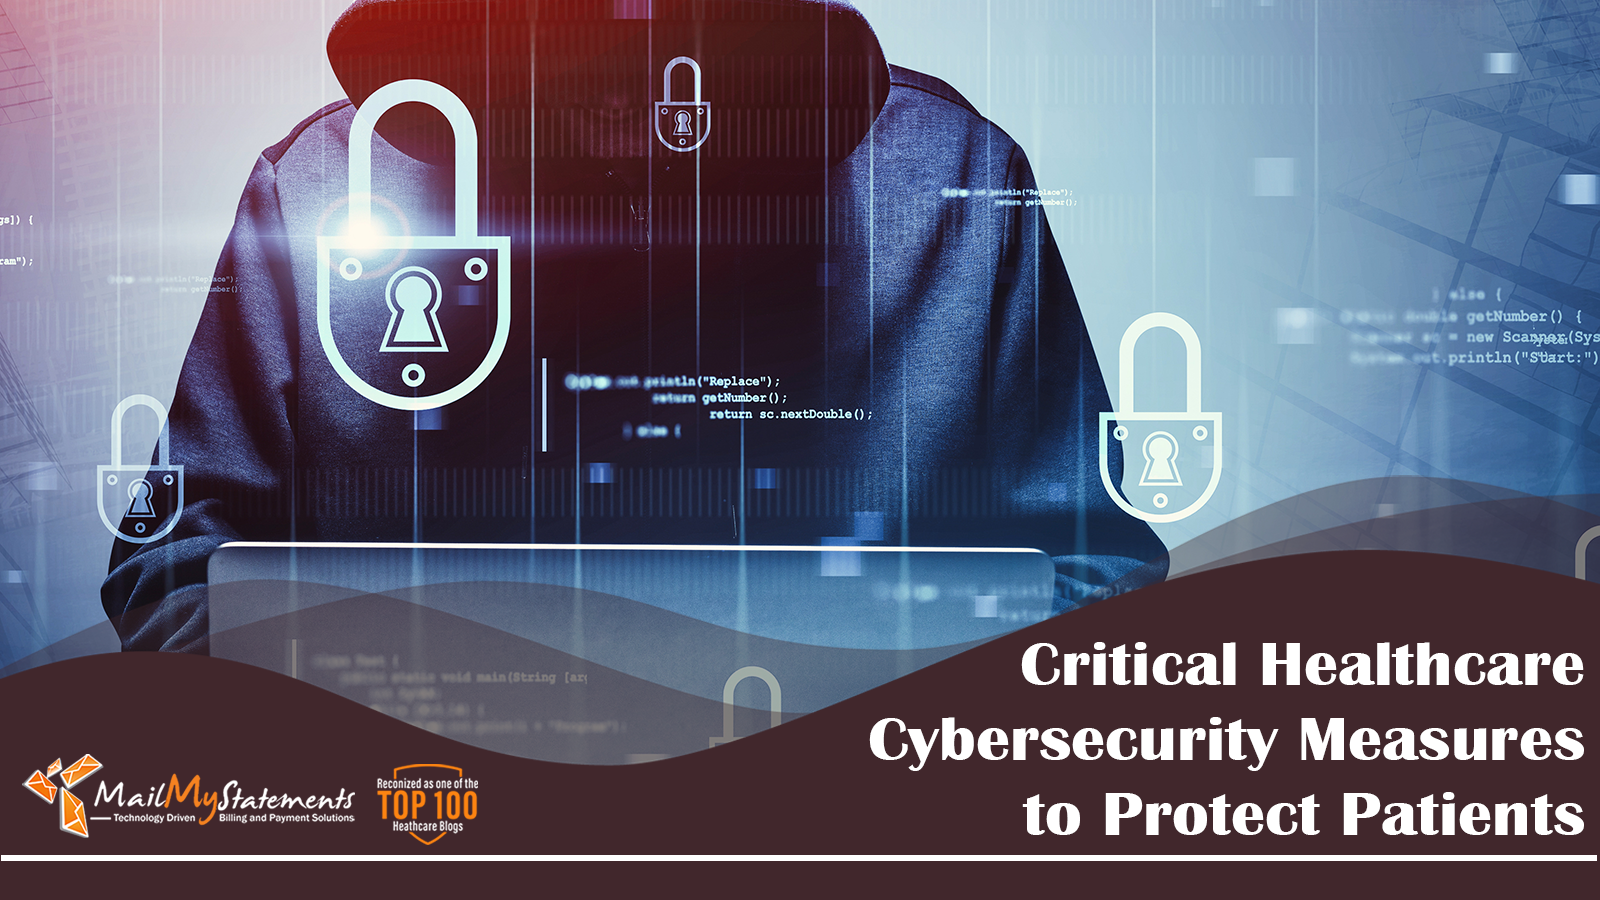 Critical Healthcare Cybersecurity Measures to Protect Patients